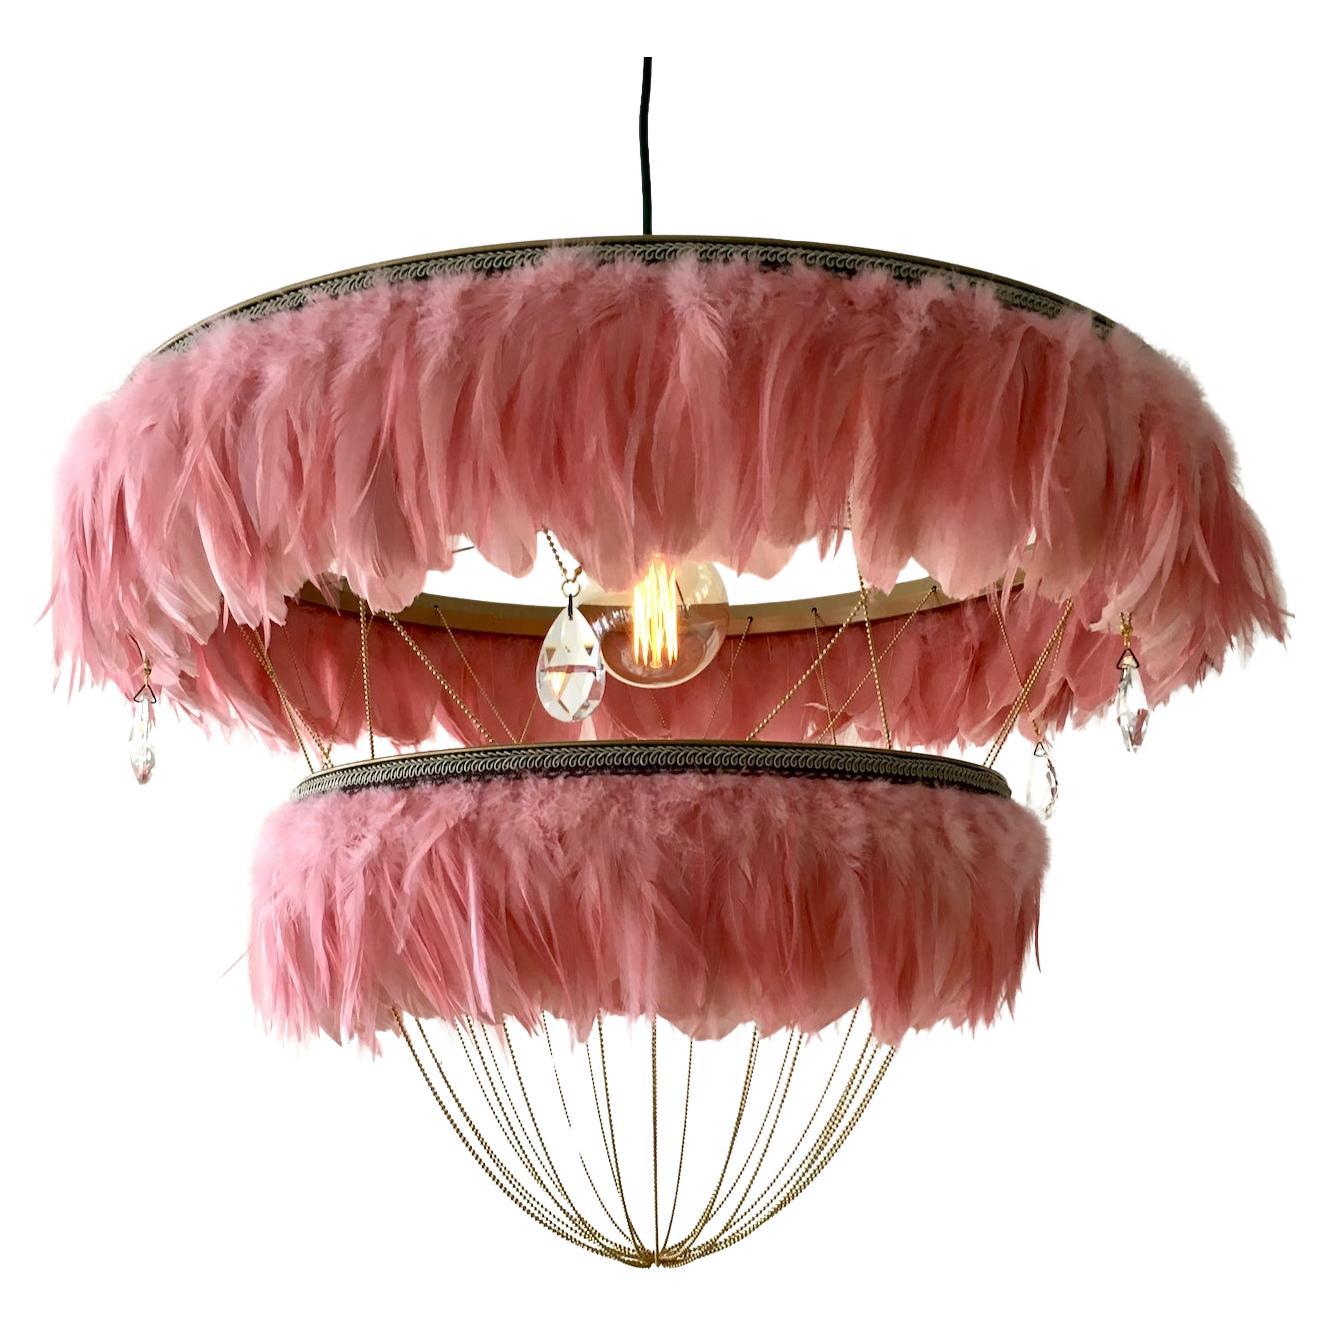 Feather Chandelier in Flamingo Pink  - Bertie -  Hand Made to order in London.  For Sale